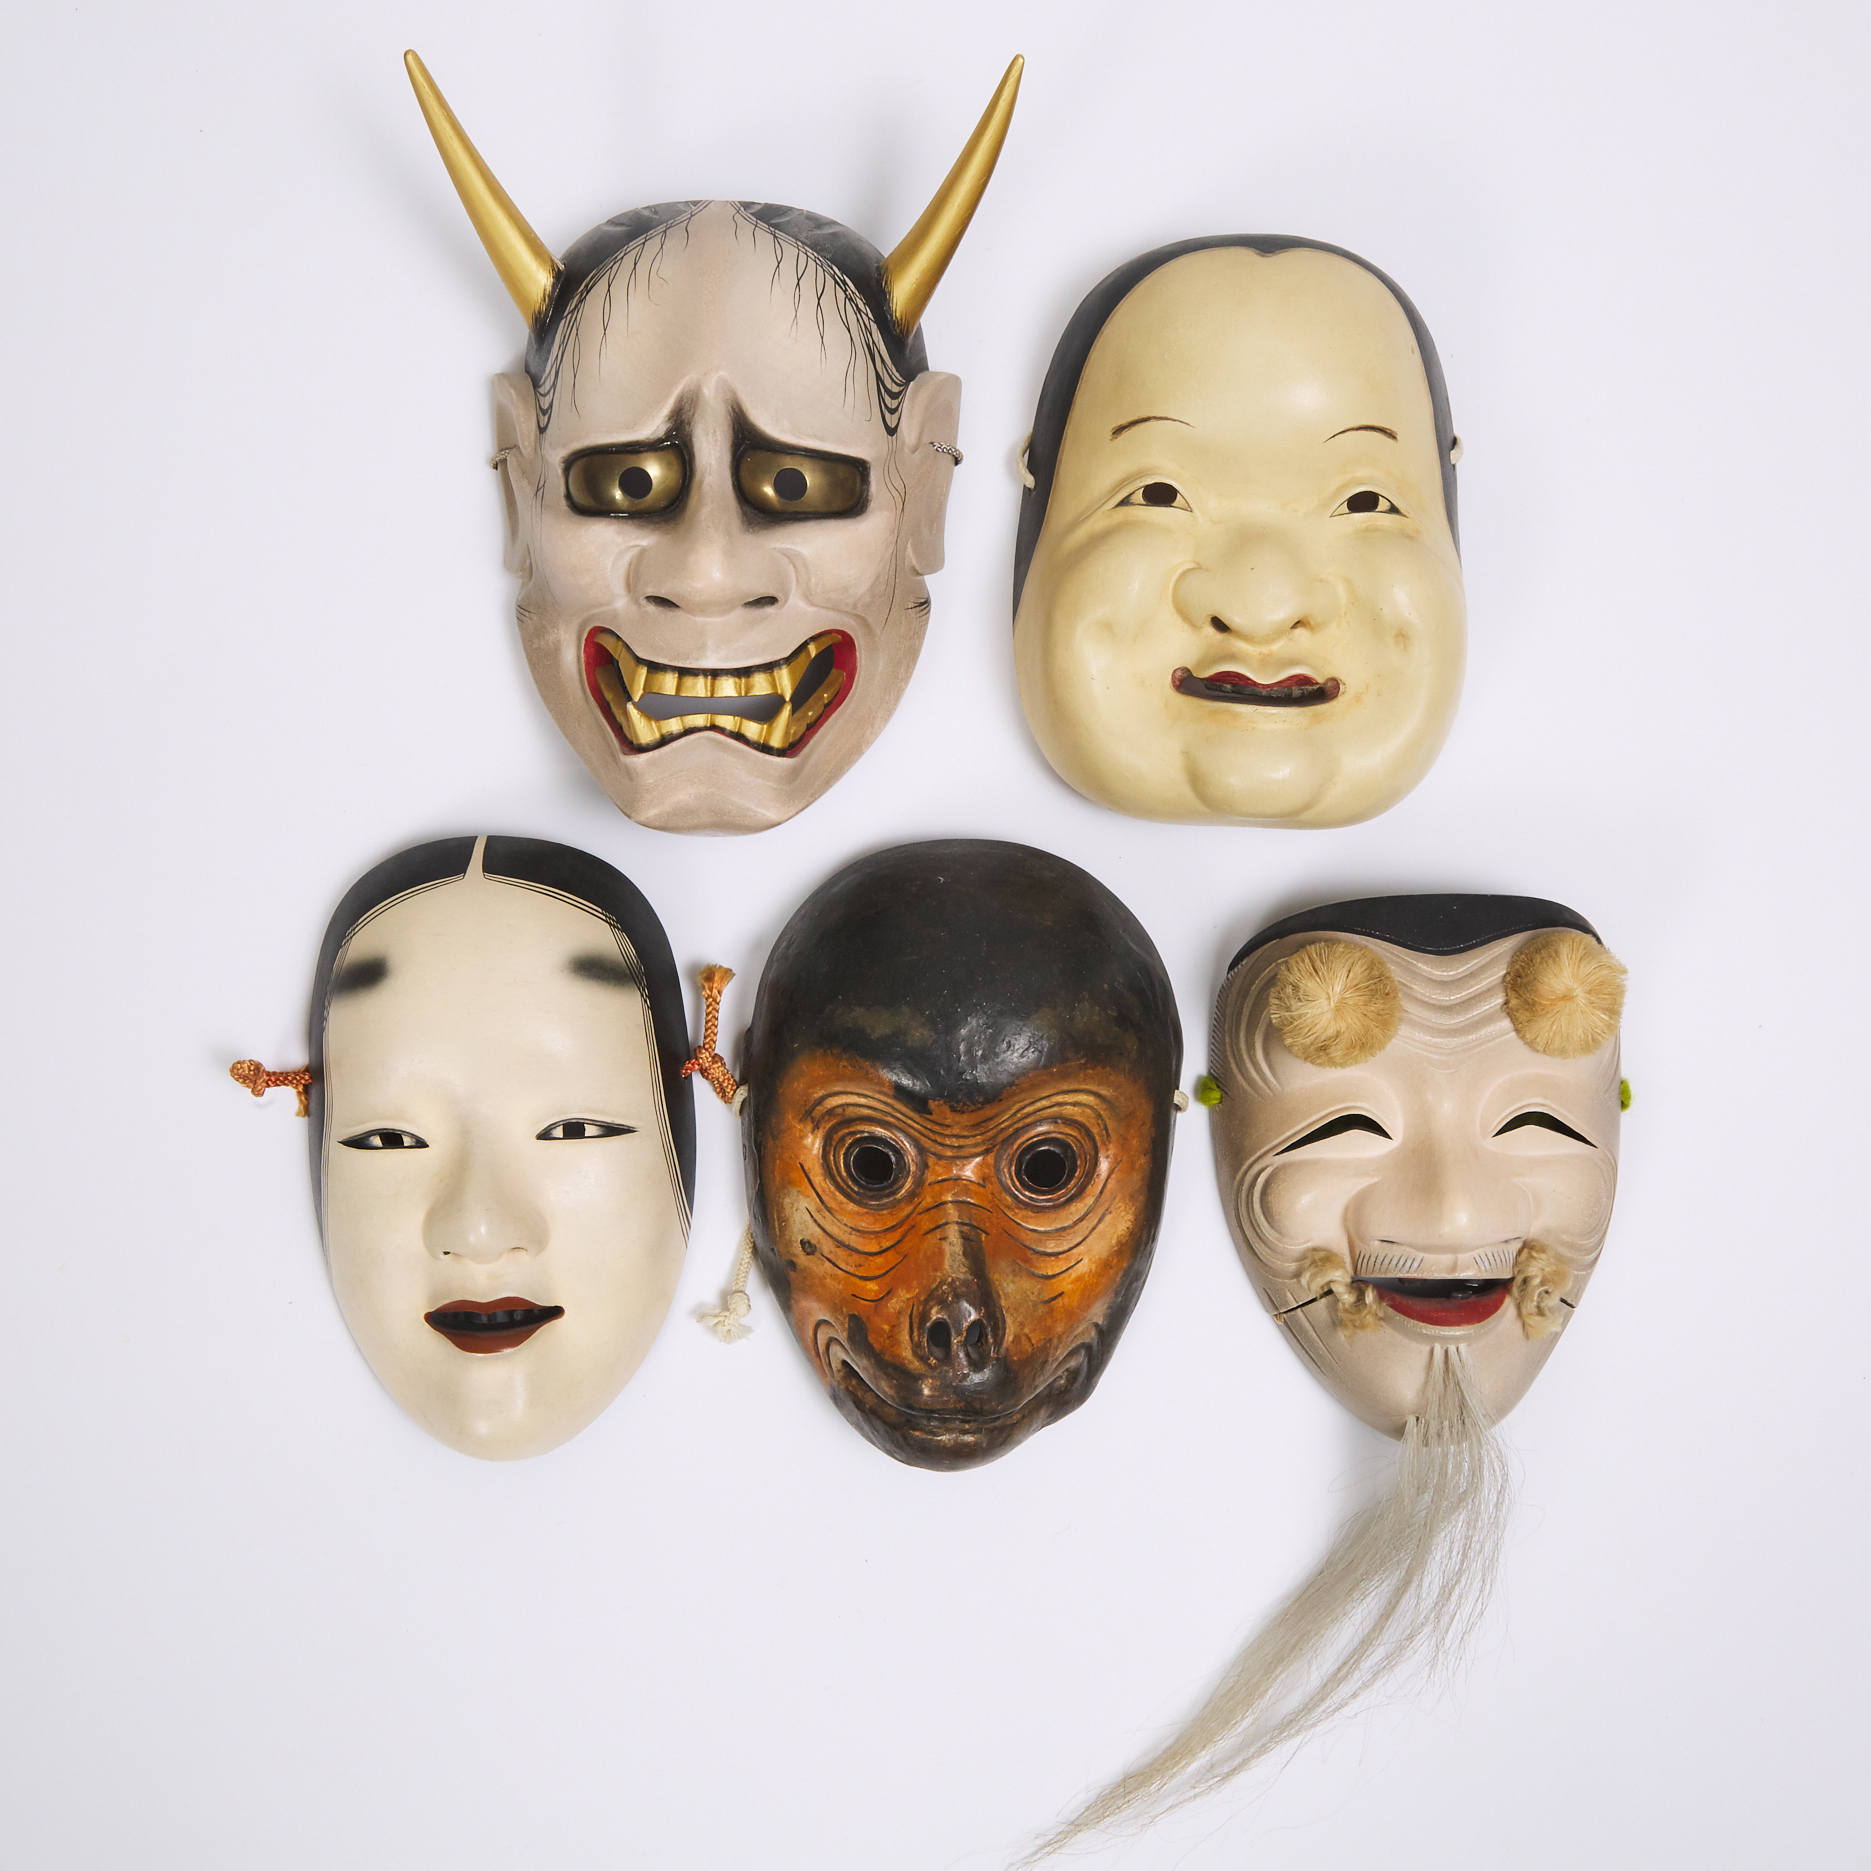 A Group of Five Japanese Noh Masks